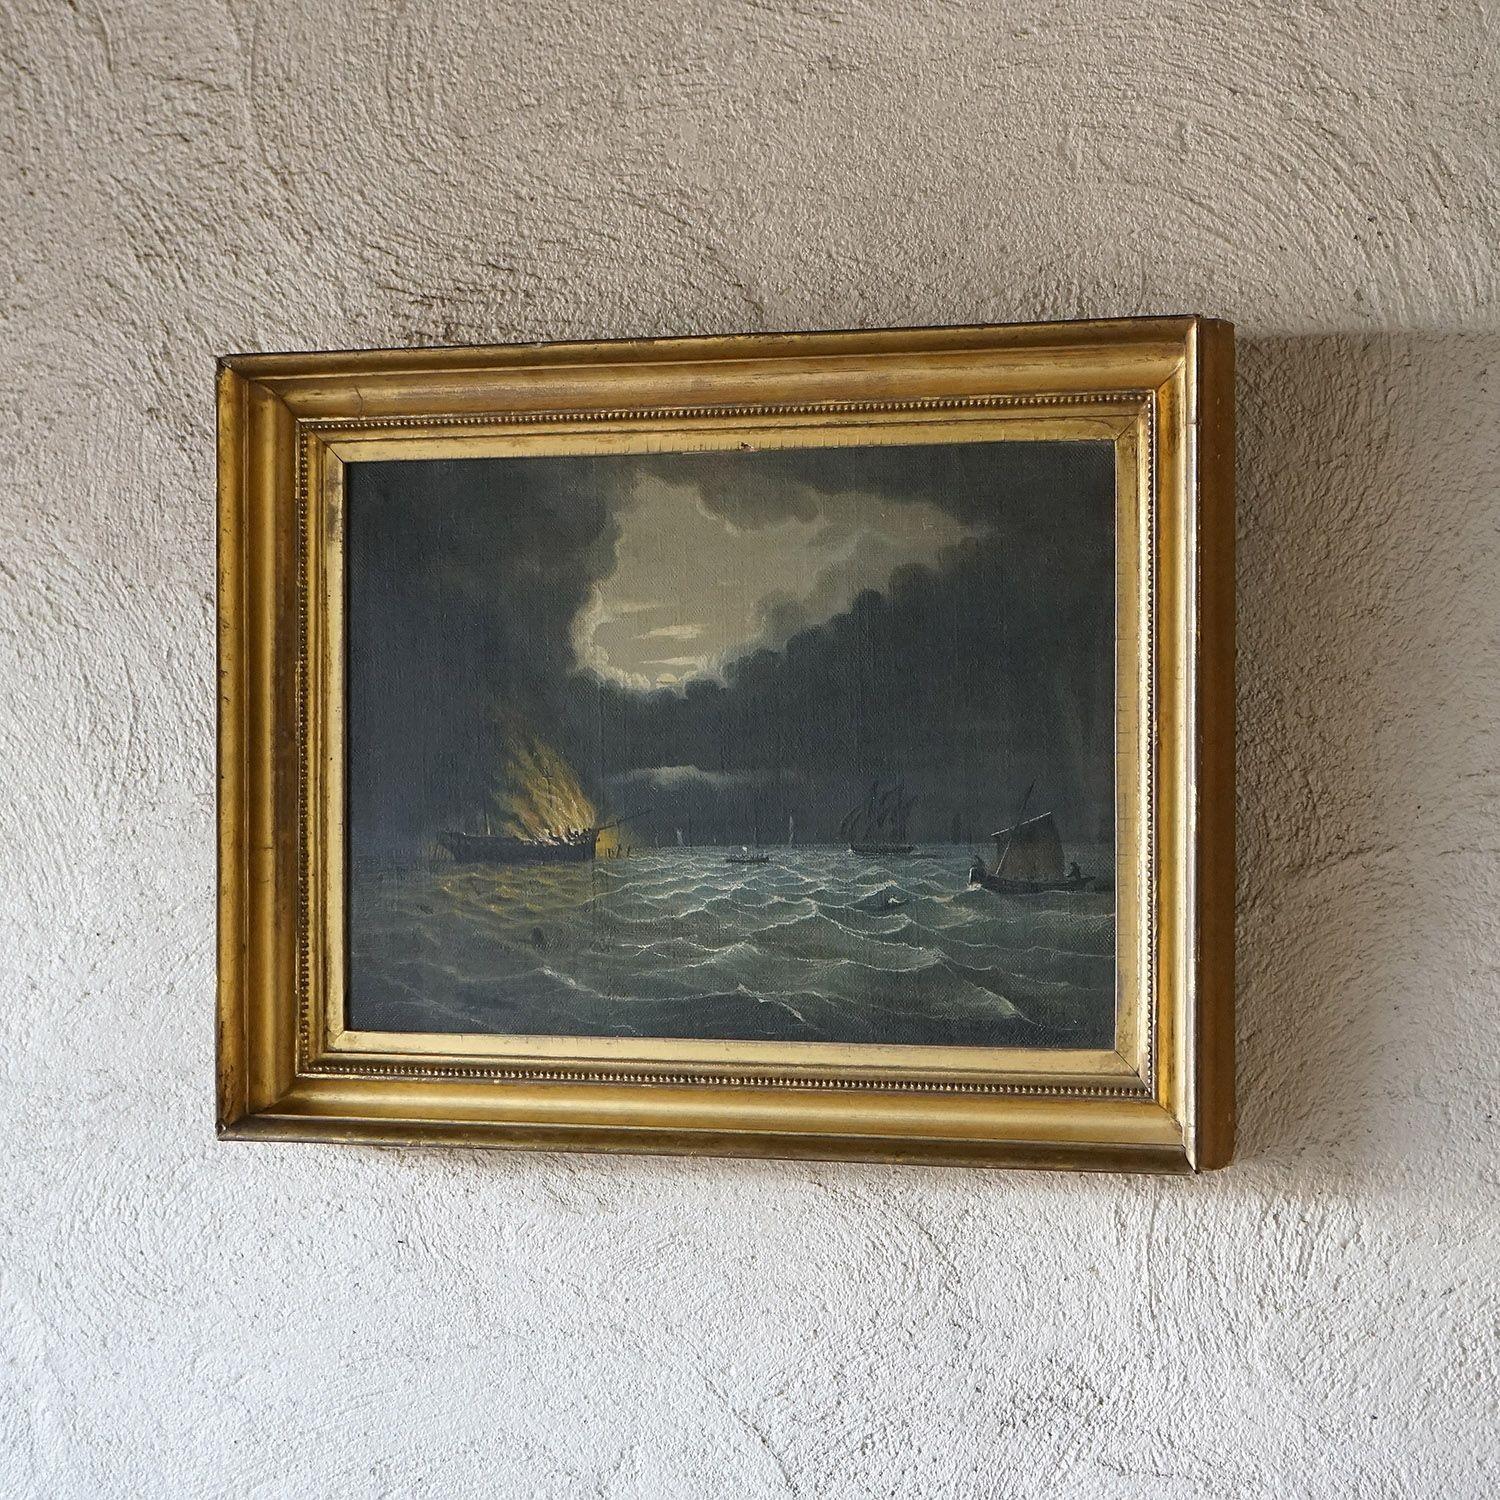 19th Century Seascape Depicting a Burning Ship, Antique Original Oil on Canvas Painting